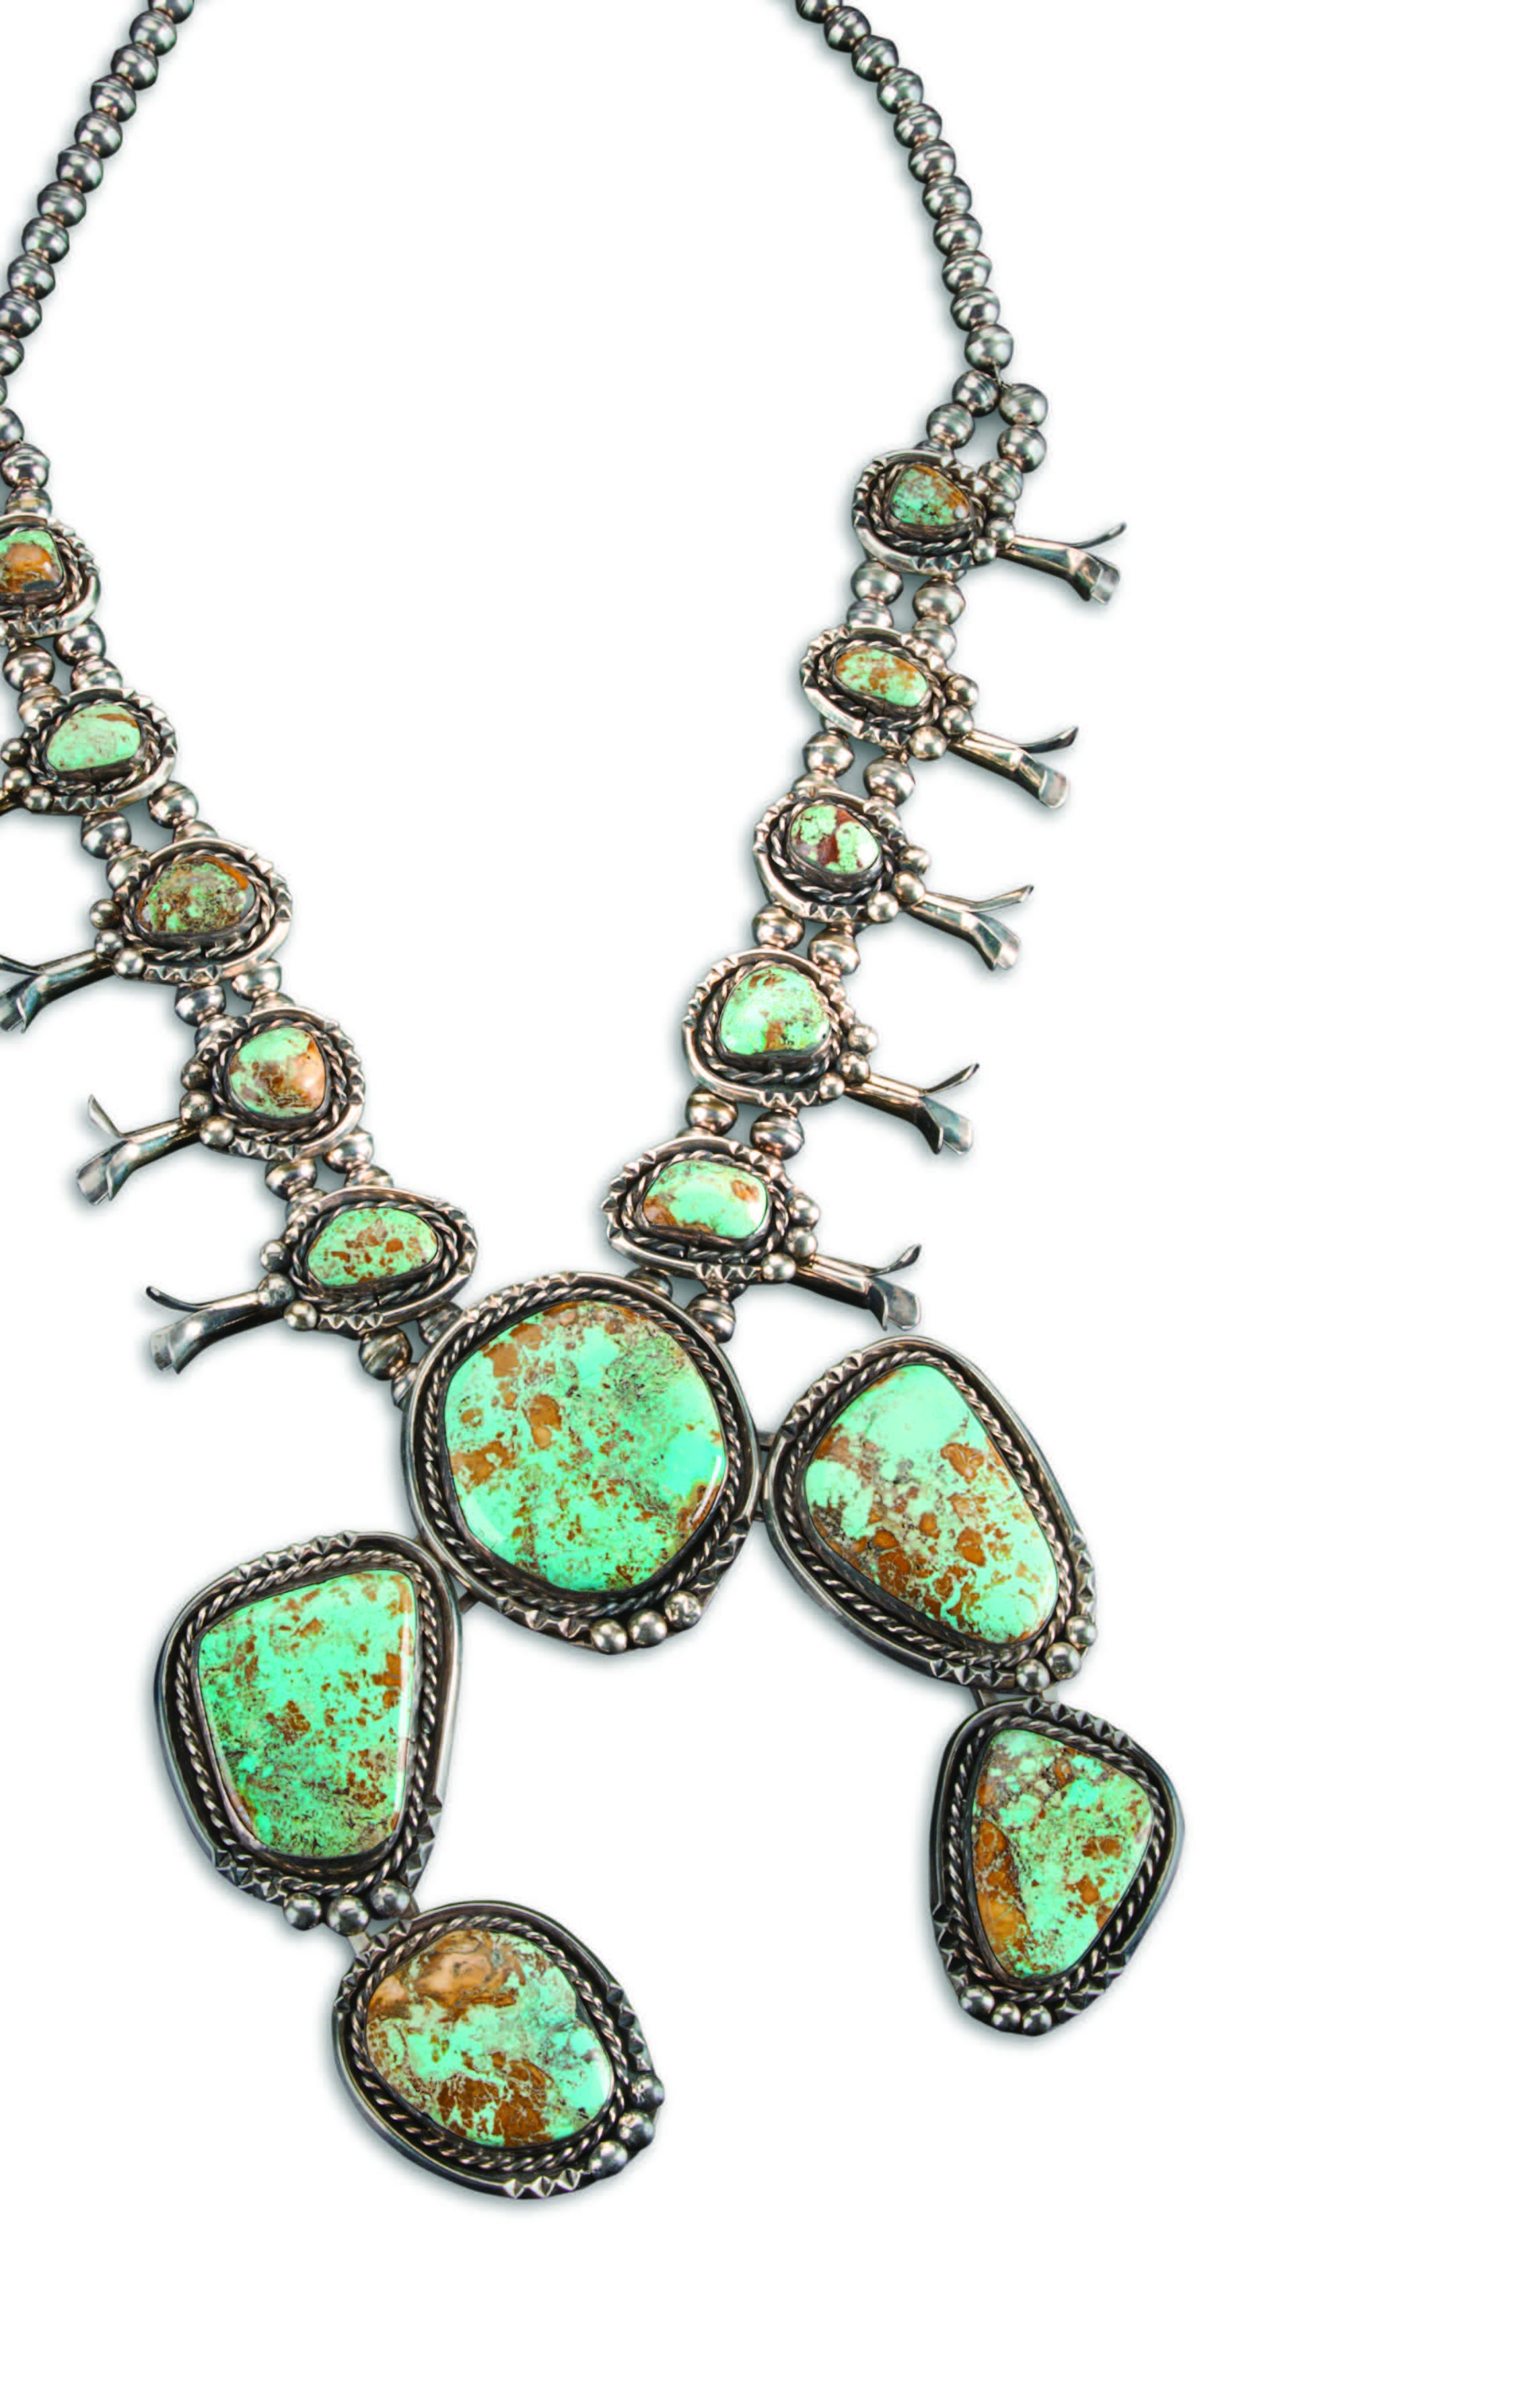 Squash-blossom necklace, ca. 1970s. Navajo. Silver, Royston turquoise. Museum of Indian Arts and Culture, DCA 56966/12, gift of Marie and Harry J. Barker